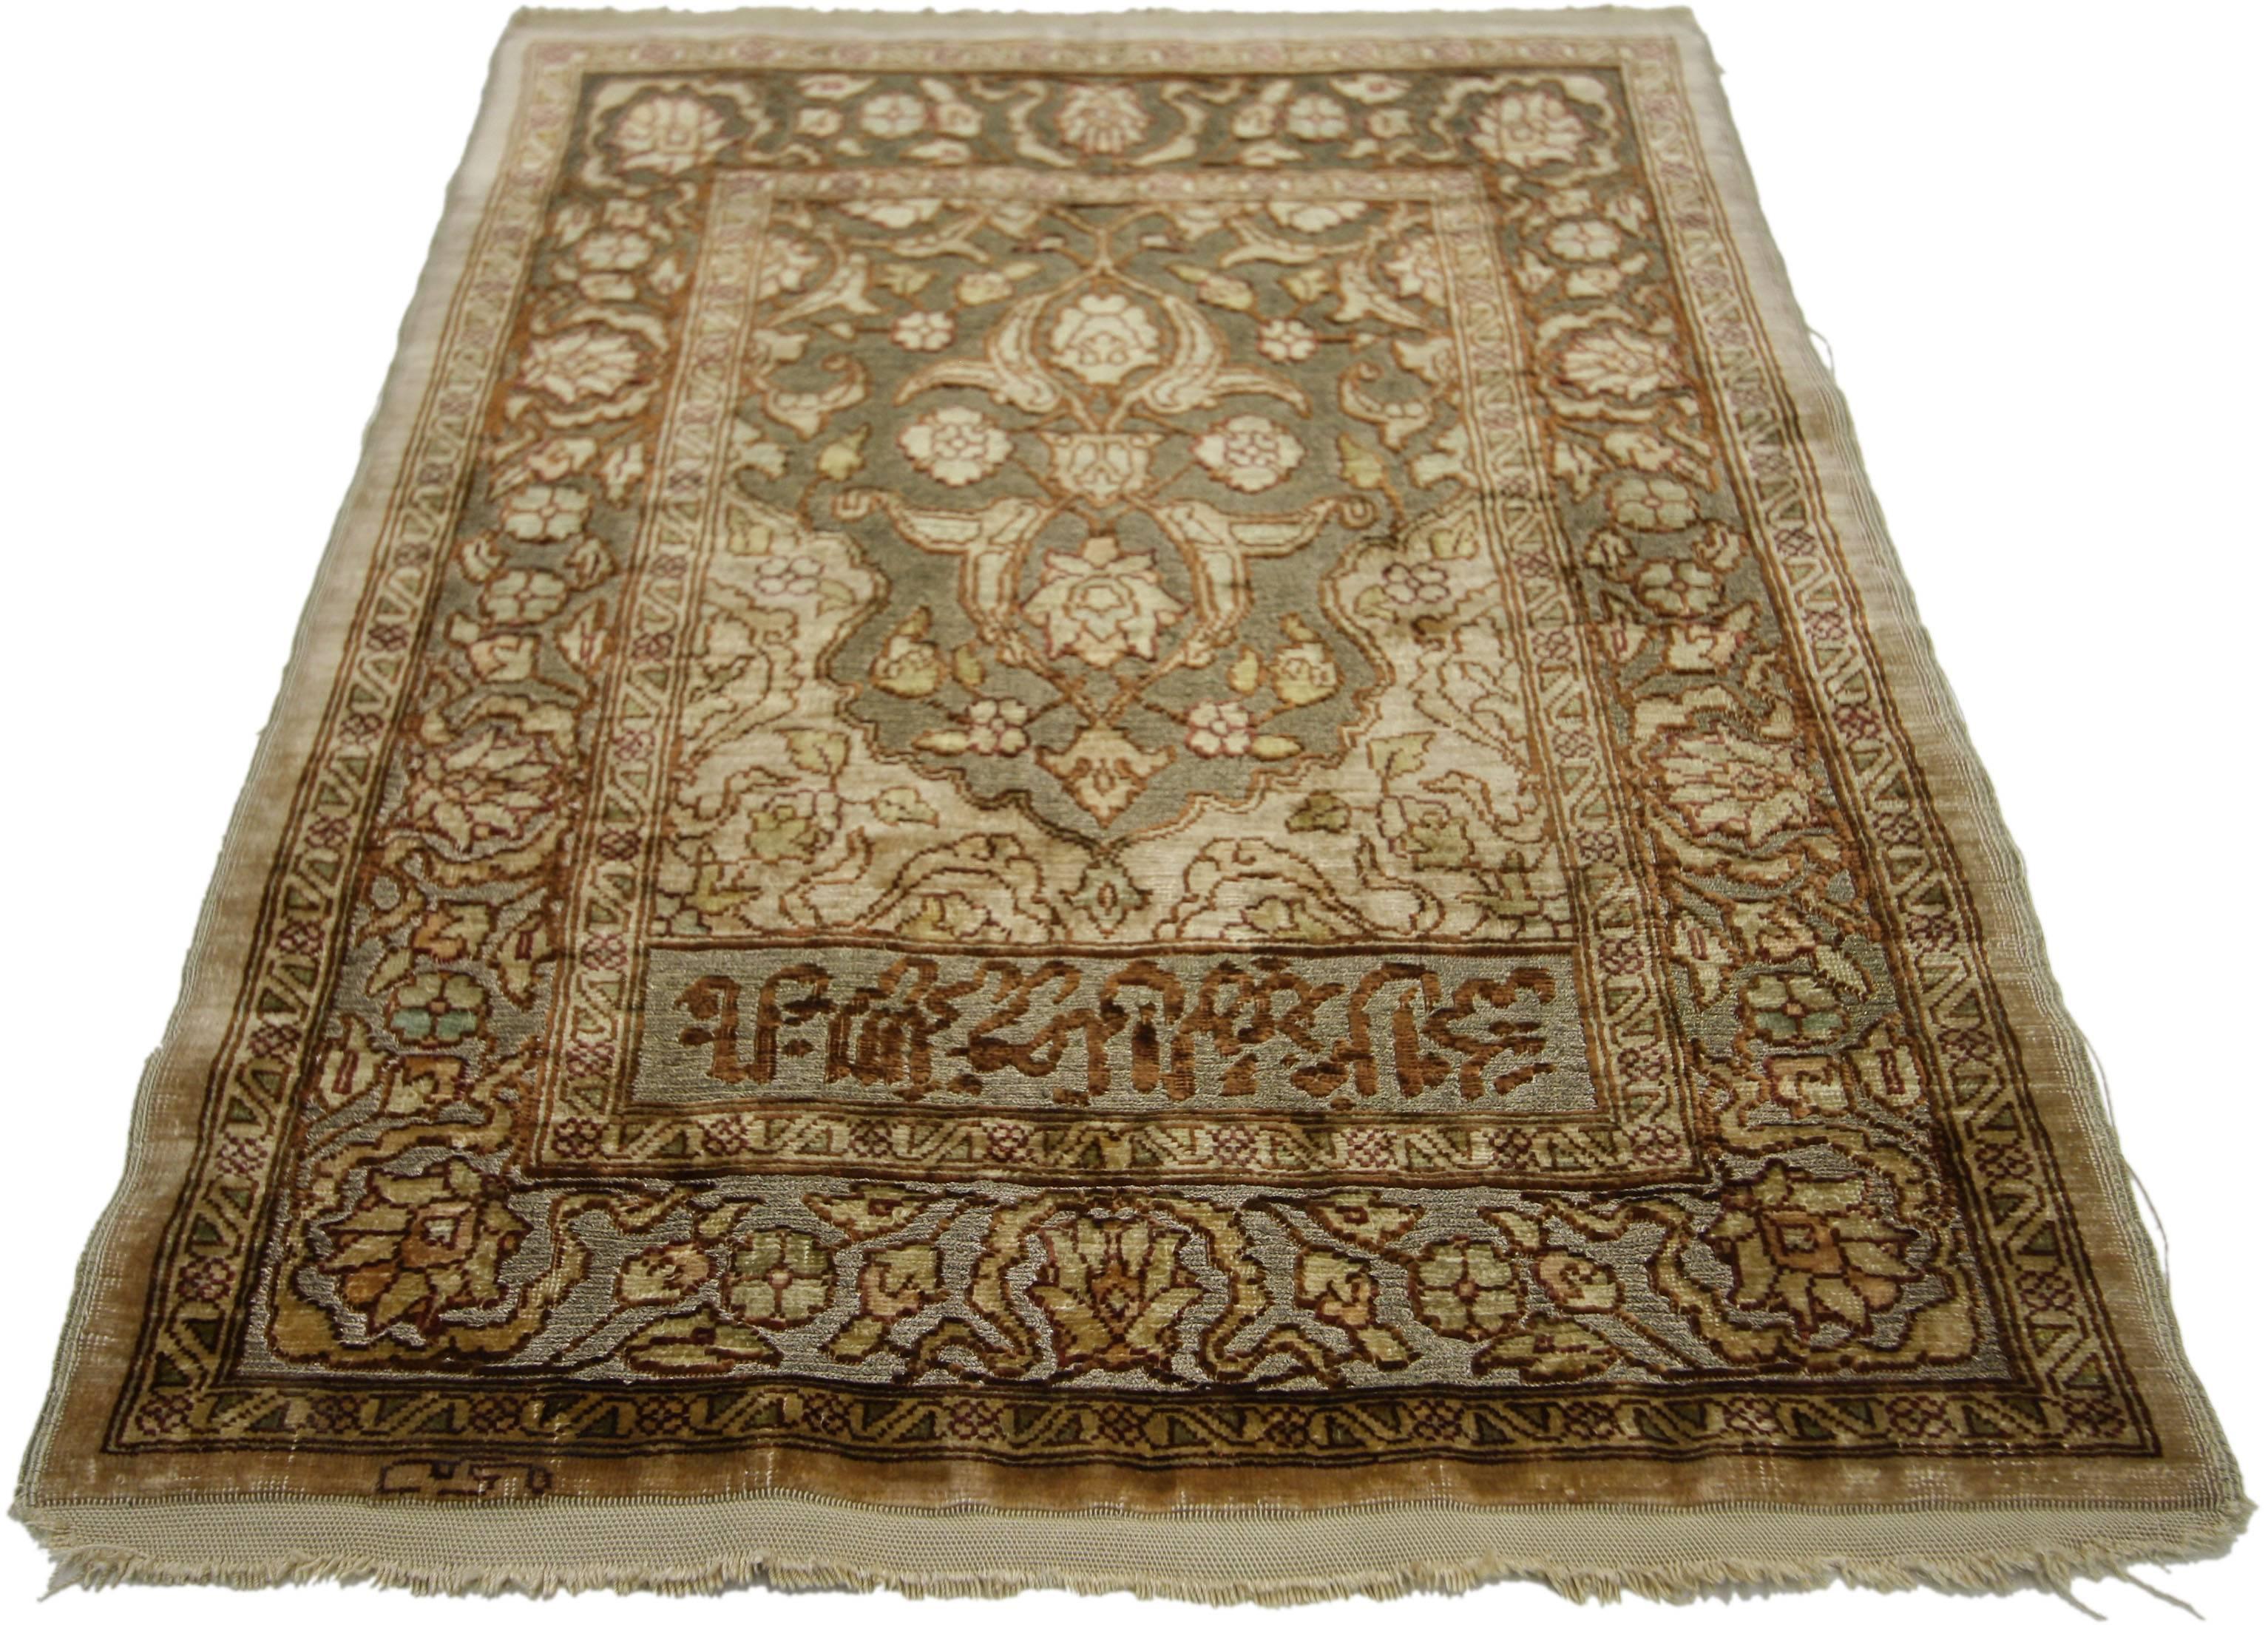 77154 Antique Turkish Silk Hereke Prayer Rug, Louis XVI Style Tapestry, Wall Hanging. This antique Turkish Hereke silk rug and/or tapestry beautifully highlights Regal ottoman style. Showcasing a Directional prayer rug layout with a mihrab ogival